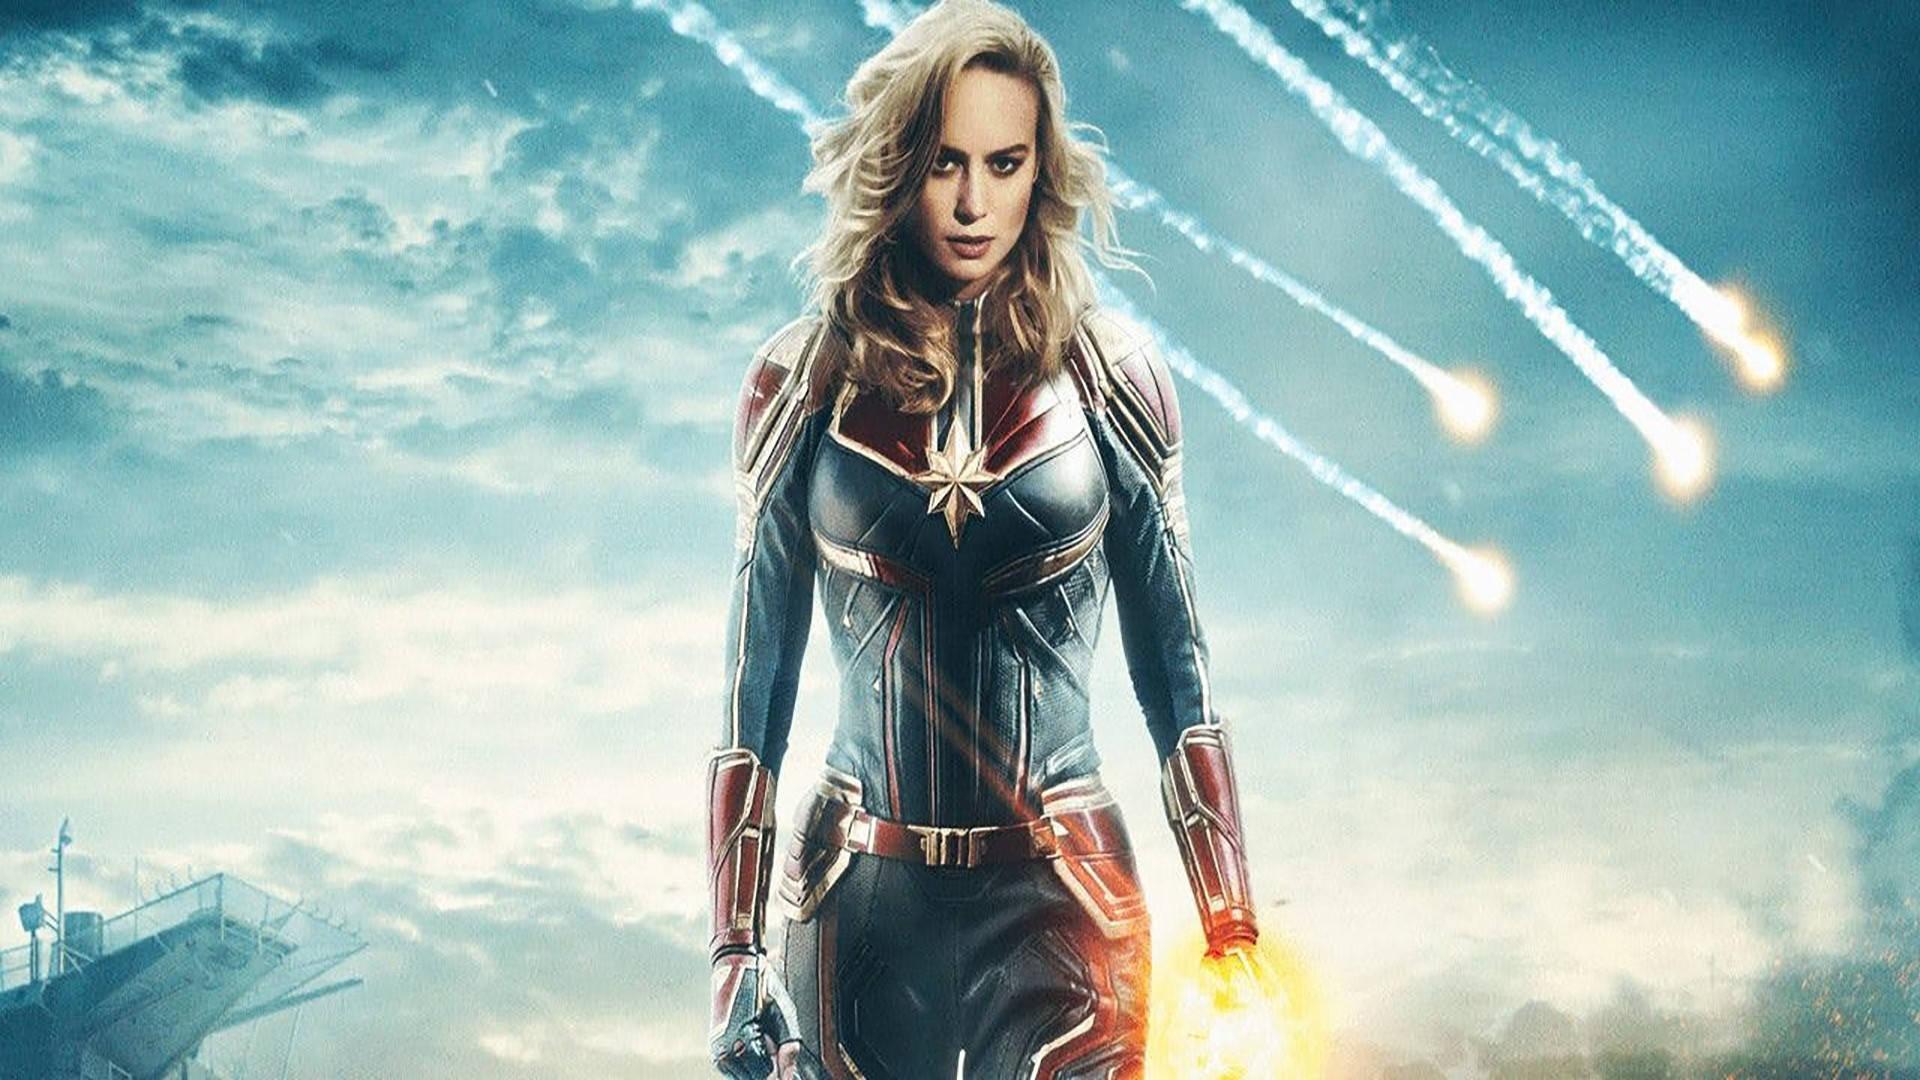 Captain Marvel Wallpaper, Photos HD and Background Image